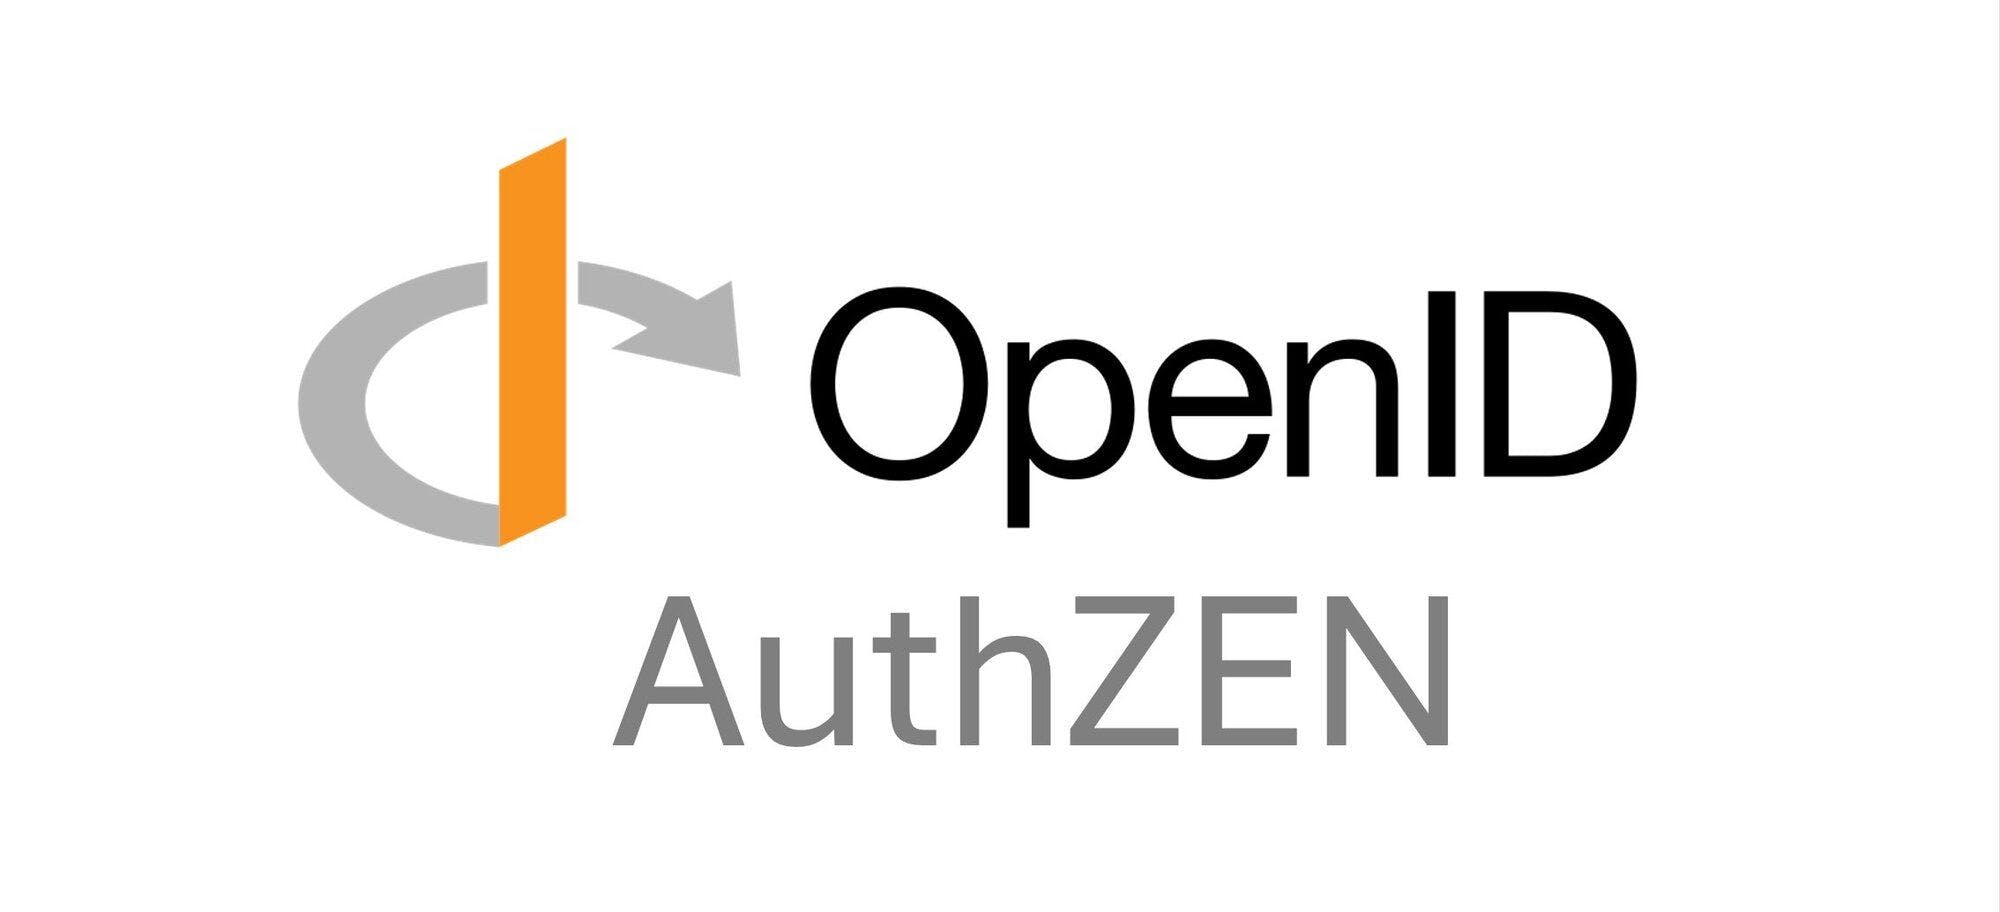 OpenID Foundation AuthZEN Working Group Announces Interop Results